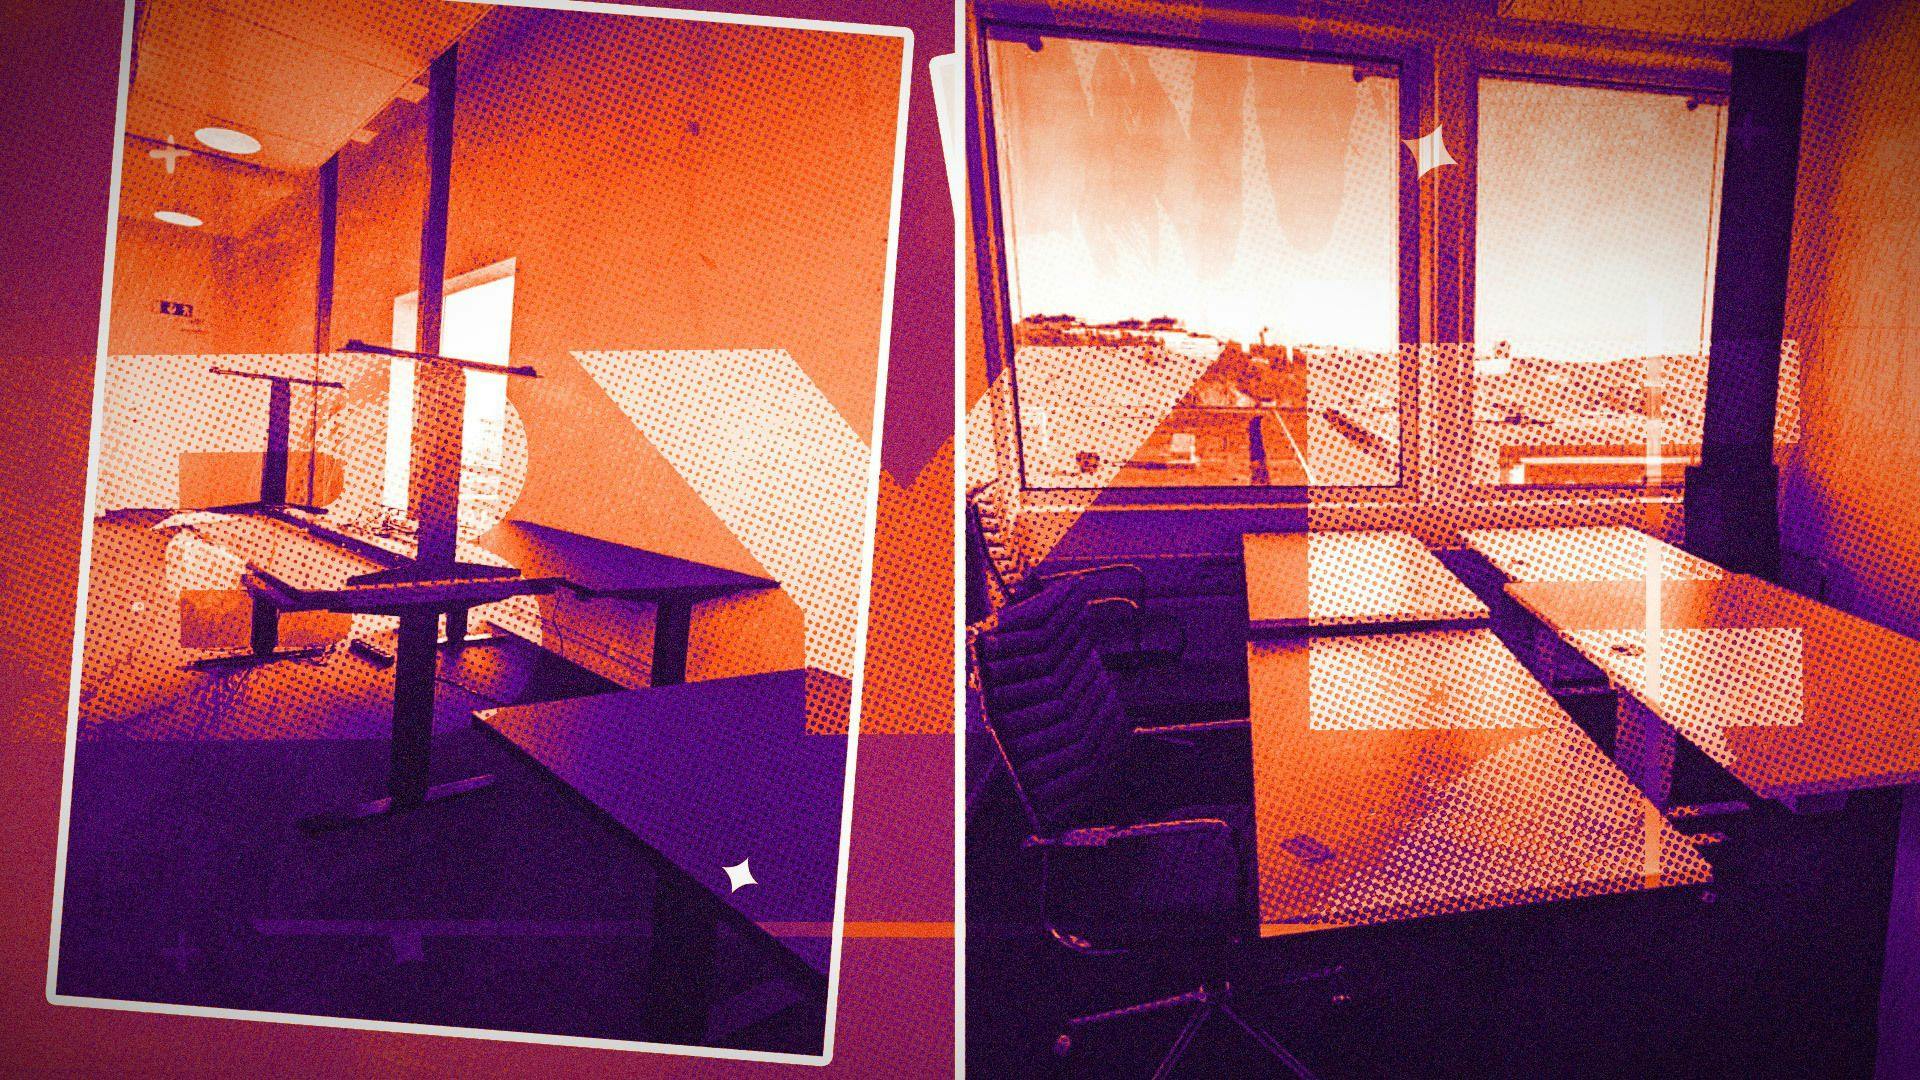 Photographs of tables and chairs with an orange and purple treatment